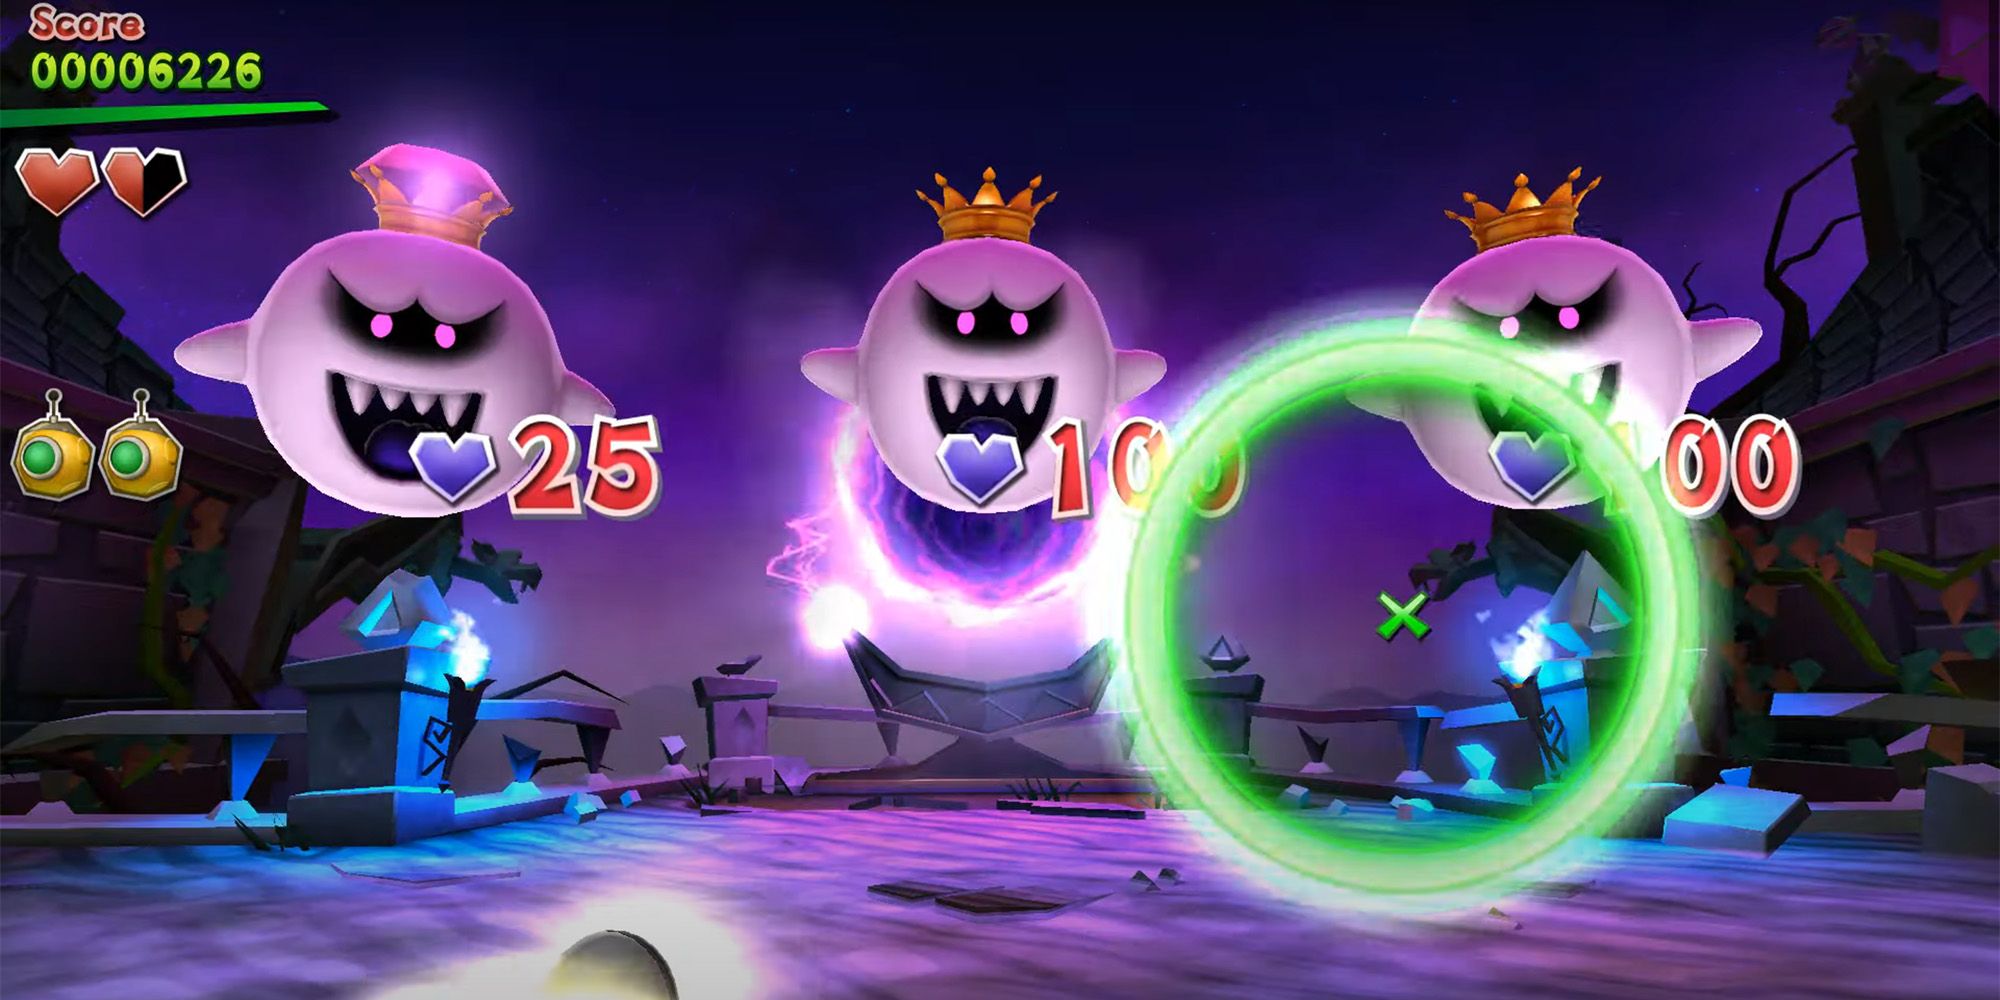 Luigi's Mansion Arcade - King Boo is surrounded by two versions of himself